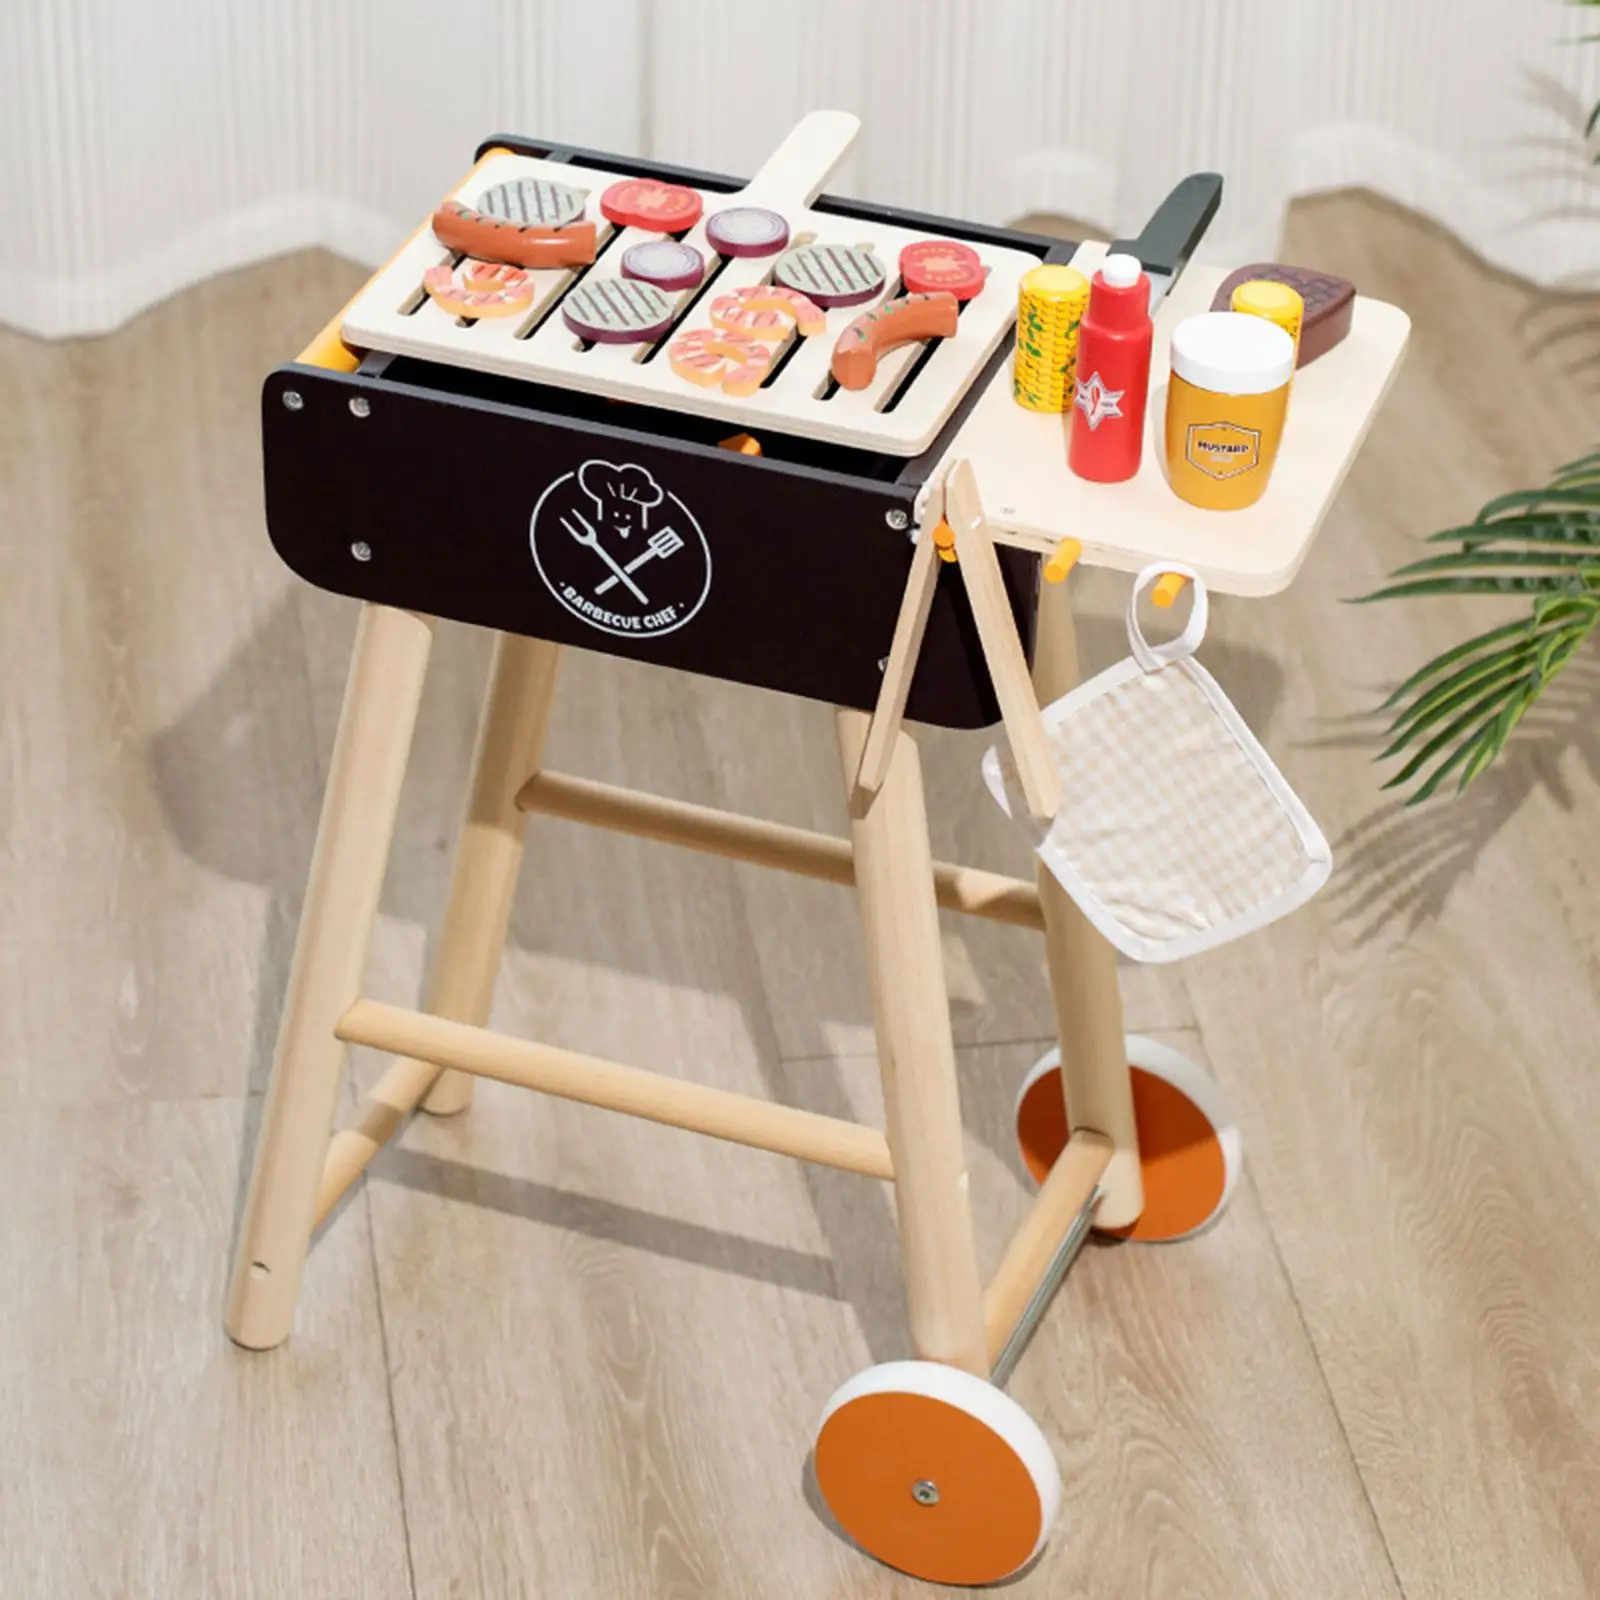 Simulation Wooden Toy BBQ Set Barbecue Grill Toy Pretend Play Role Game Learning Educational Toy for Kids Boy Toddlers